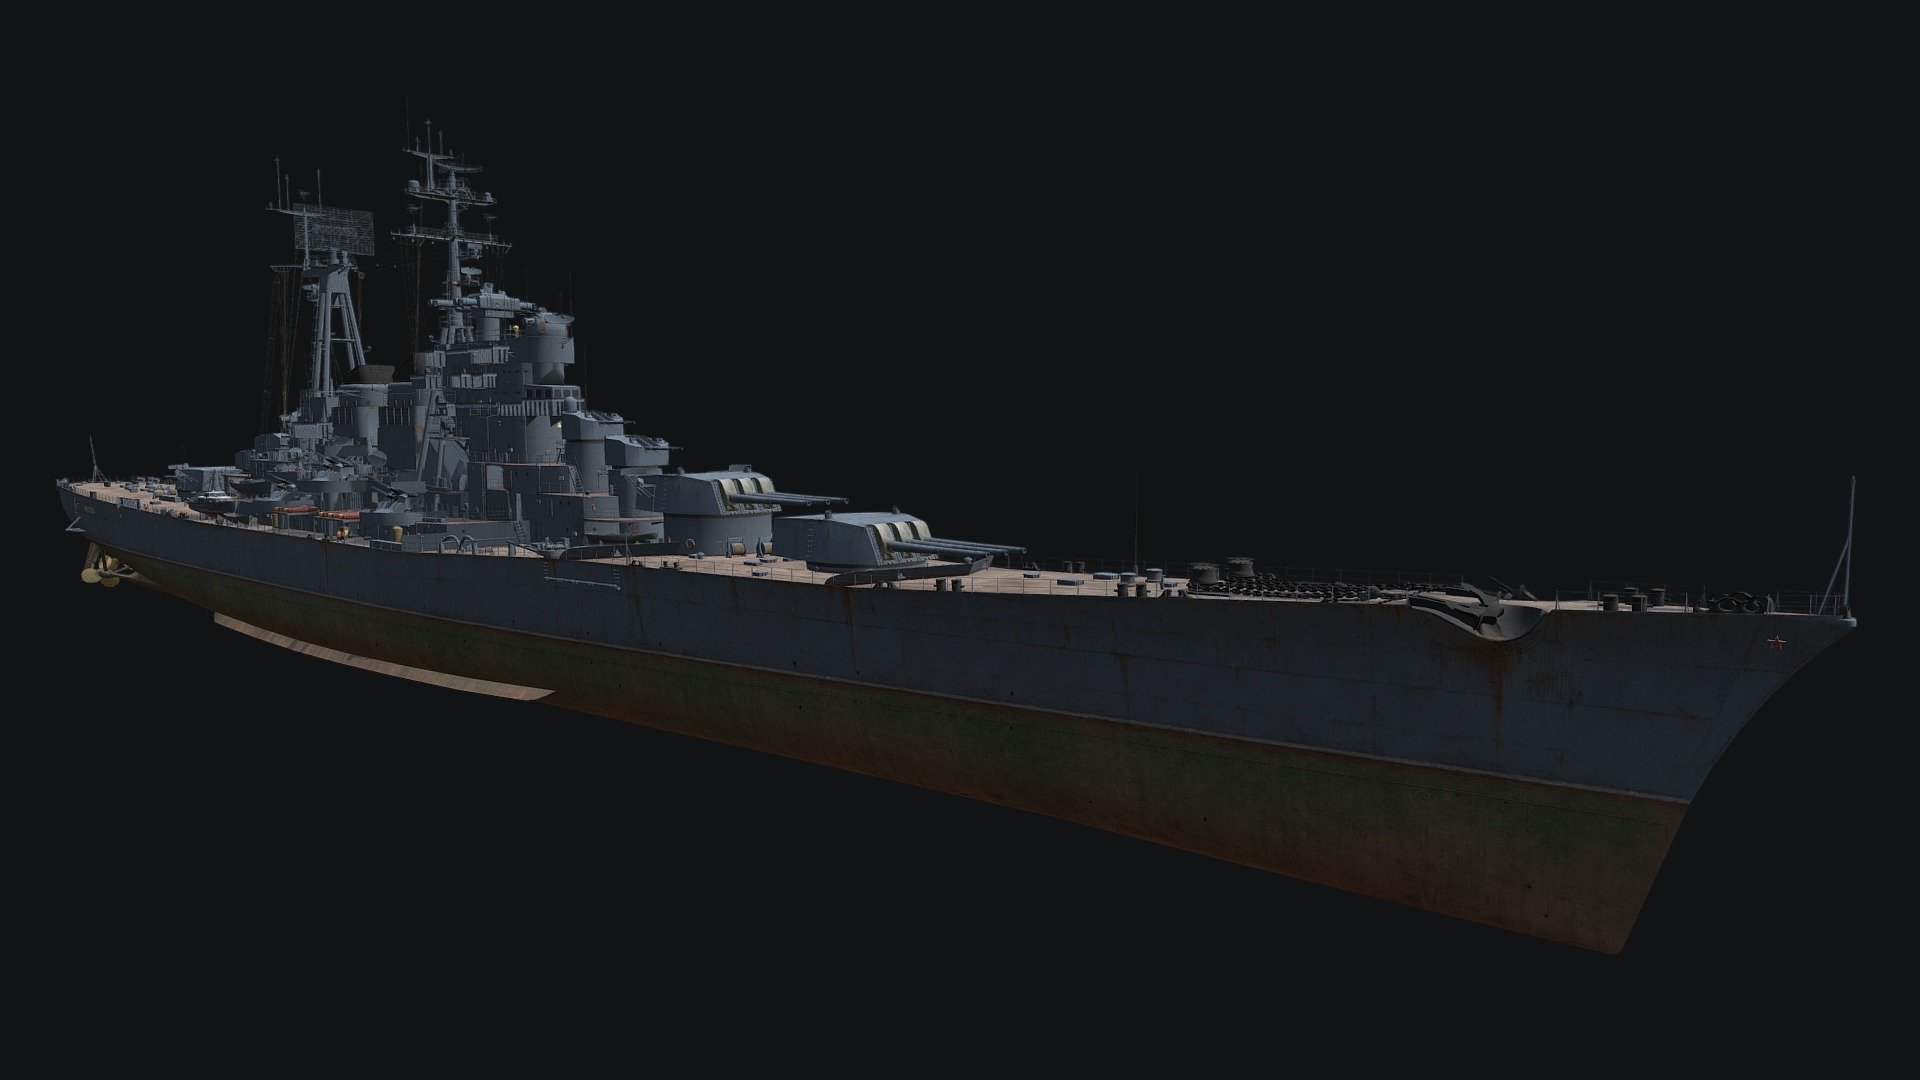 This model was developed by Wargaming for their popular game ‘World of Warships’. Play World of Warships now to send these ships into battle!

Use the following link to start playing!

https://worldofwarships.com/

Moskva — Soviet Tier X cruiser.

A ship designed and intended to destroy light enemy cruisers and fight against heavy cruisers (Project 66). Unlike her foreign counterparts, she boasted bigger dimensions and better armor protection. The cruiser's main battery surpassed foreign guns in maximum range and destructive power but had a lower rate of fire.

Moskva is available in the Armory for 244,000 Coal 3d model